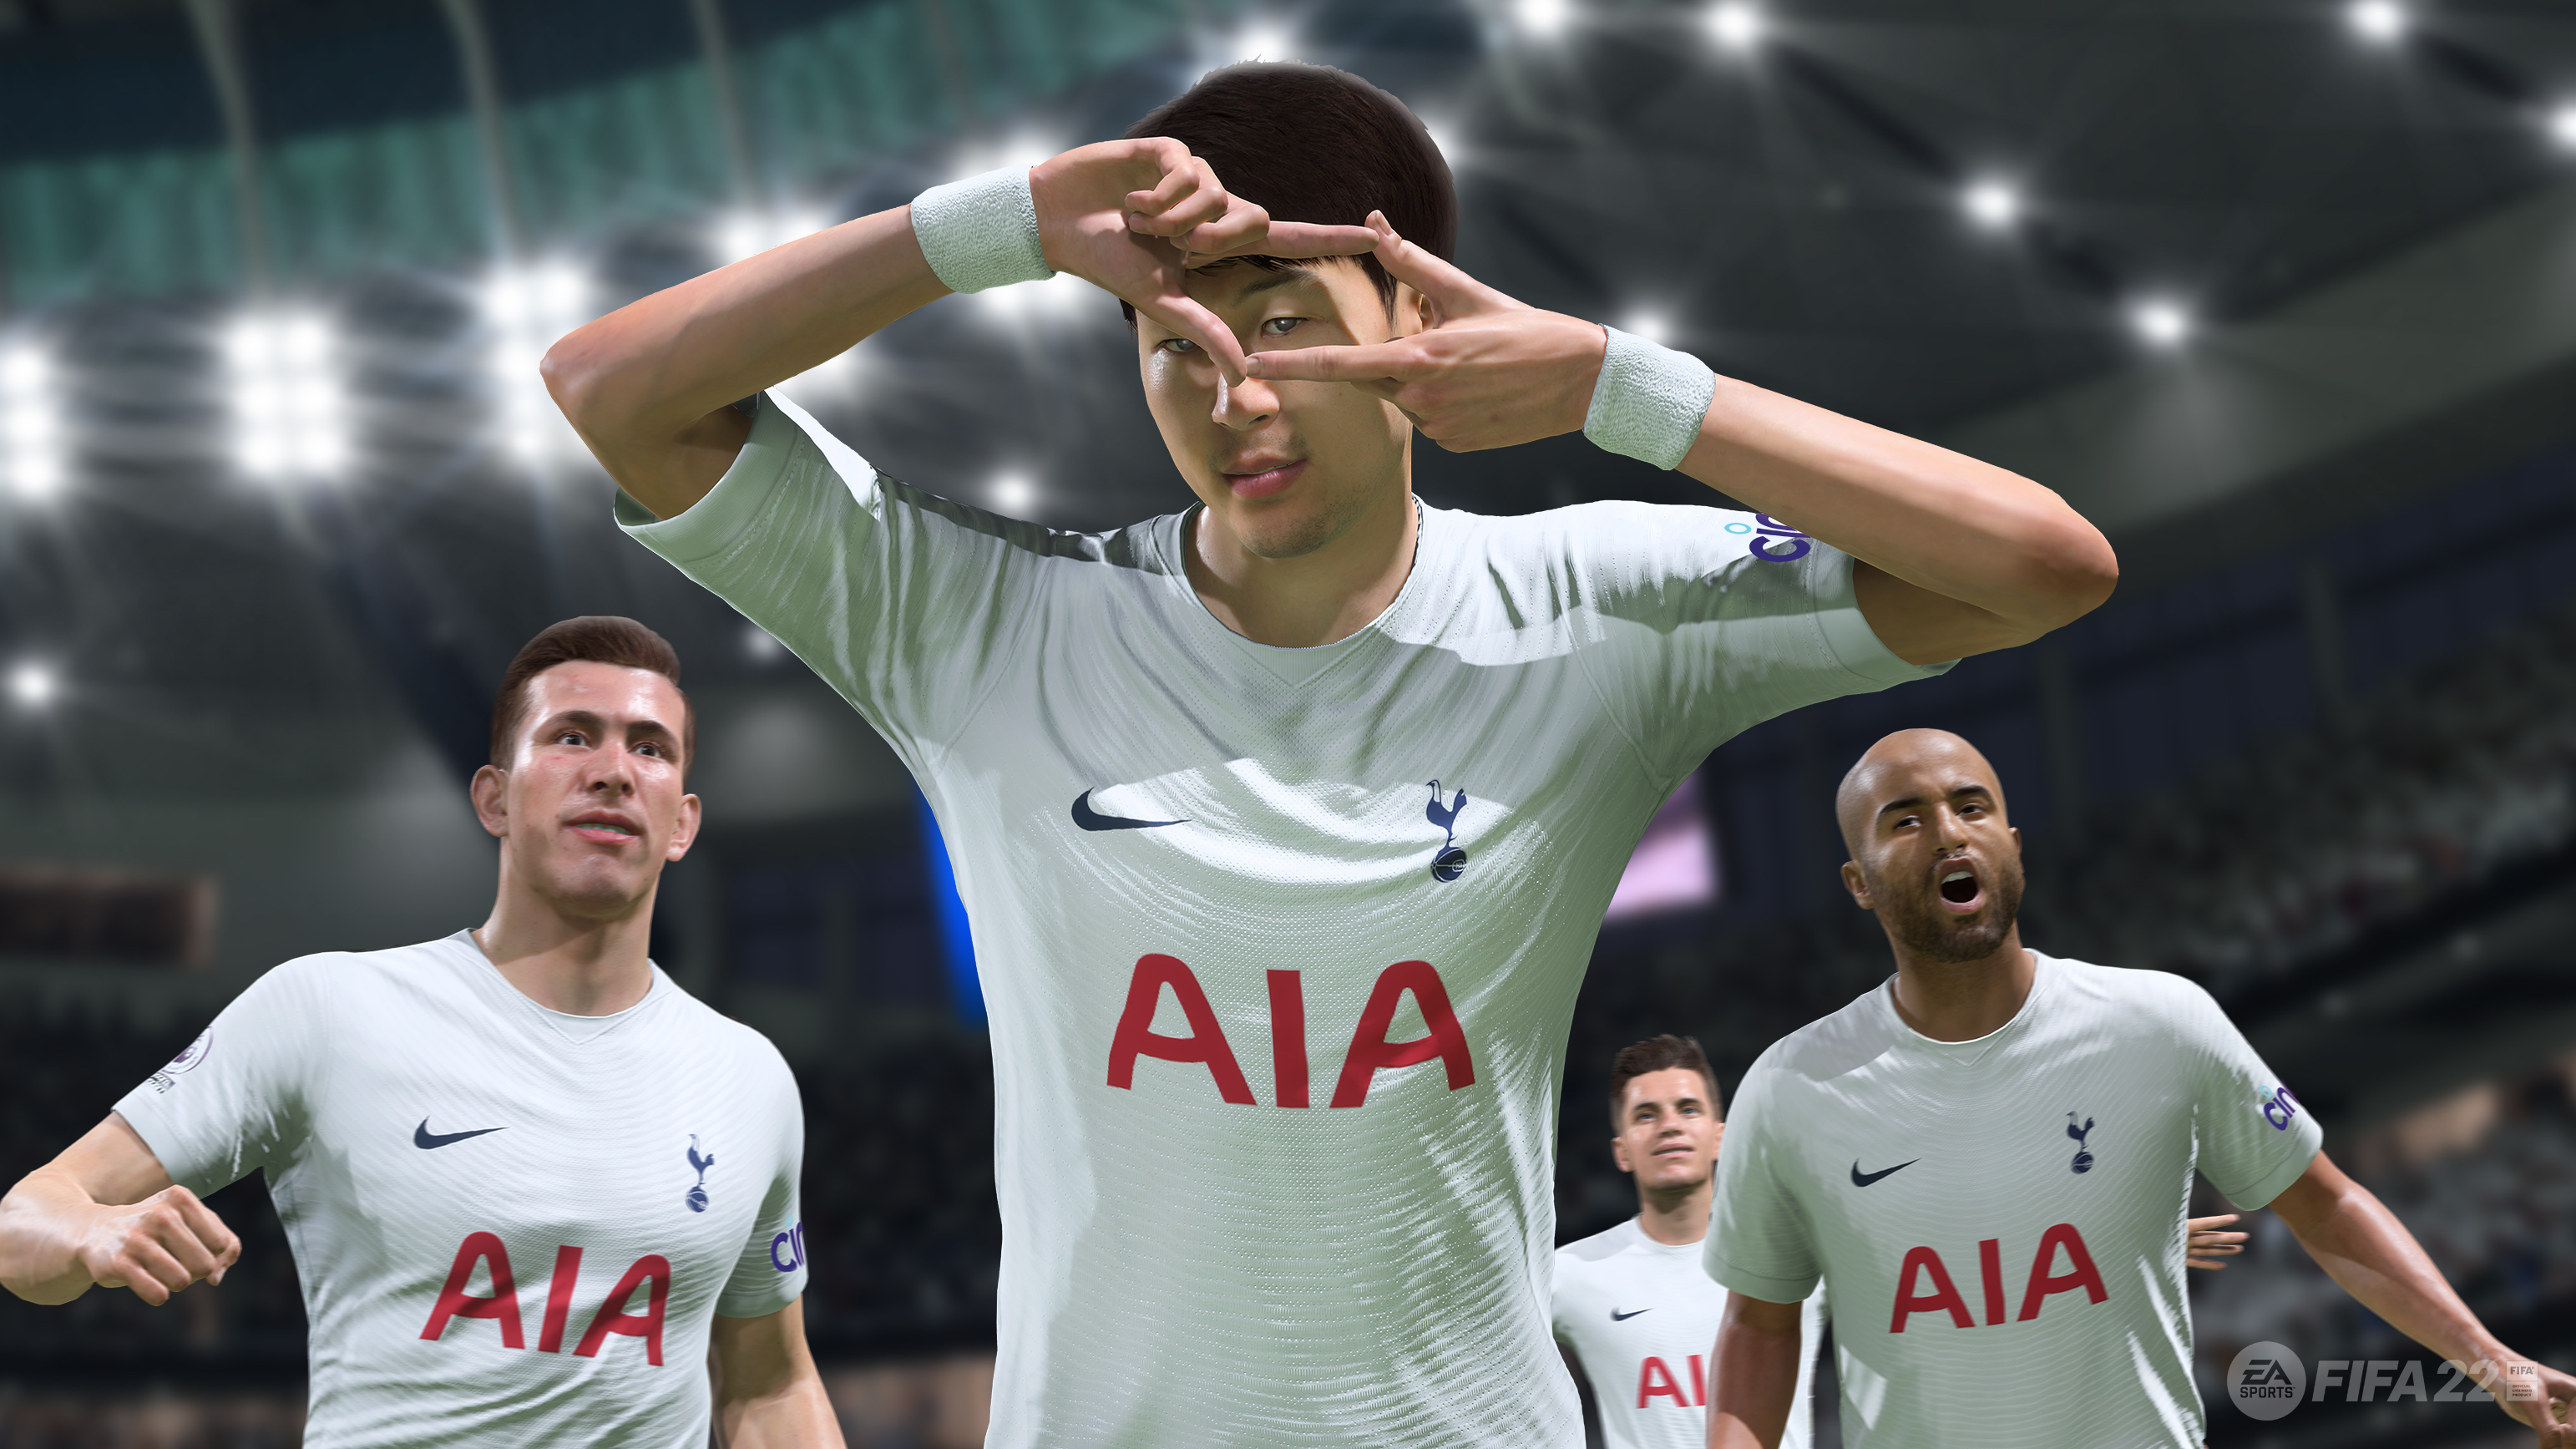 FIFA wants to charge EA Sports $1 billion to use video game name